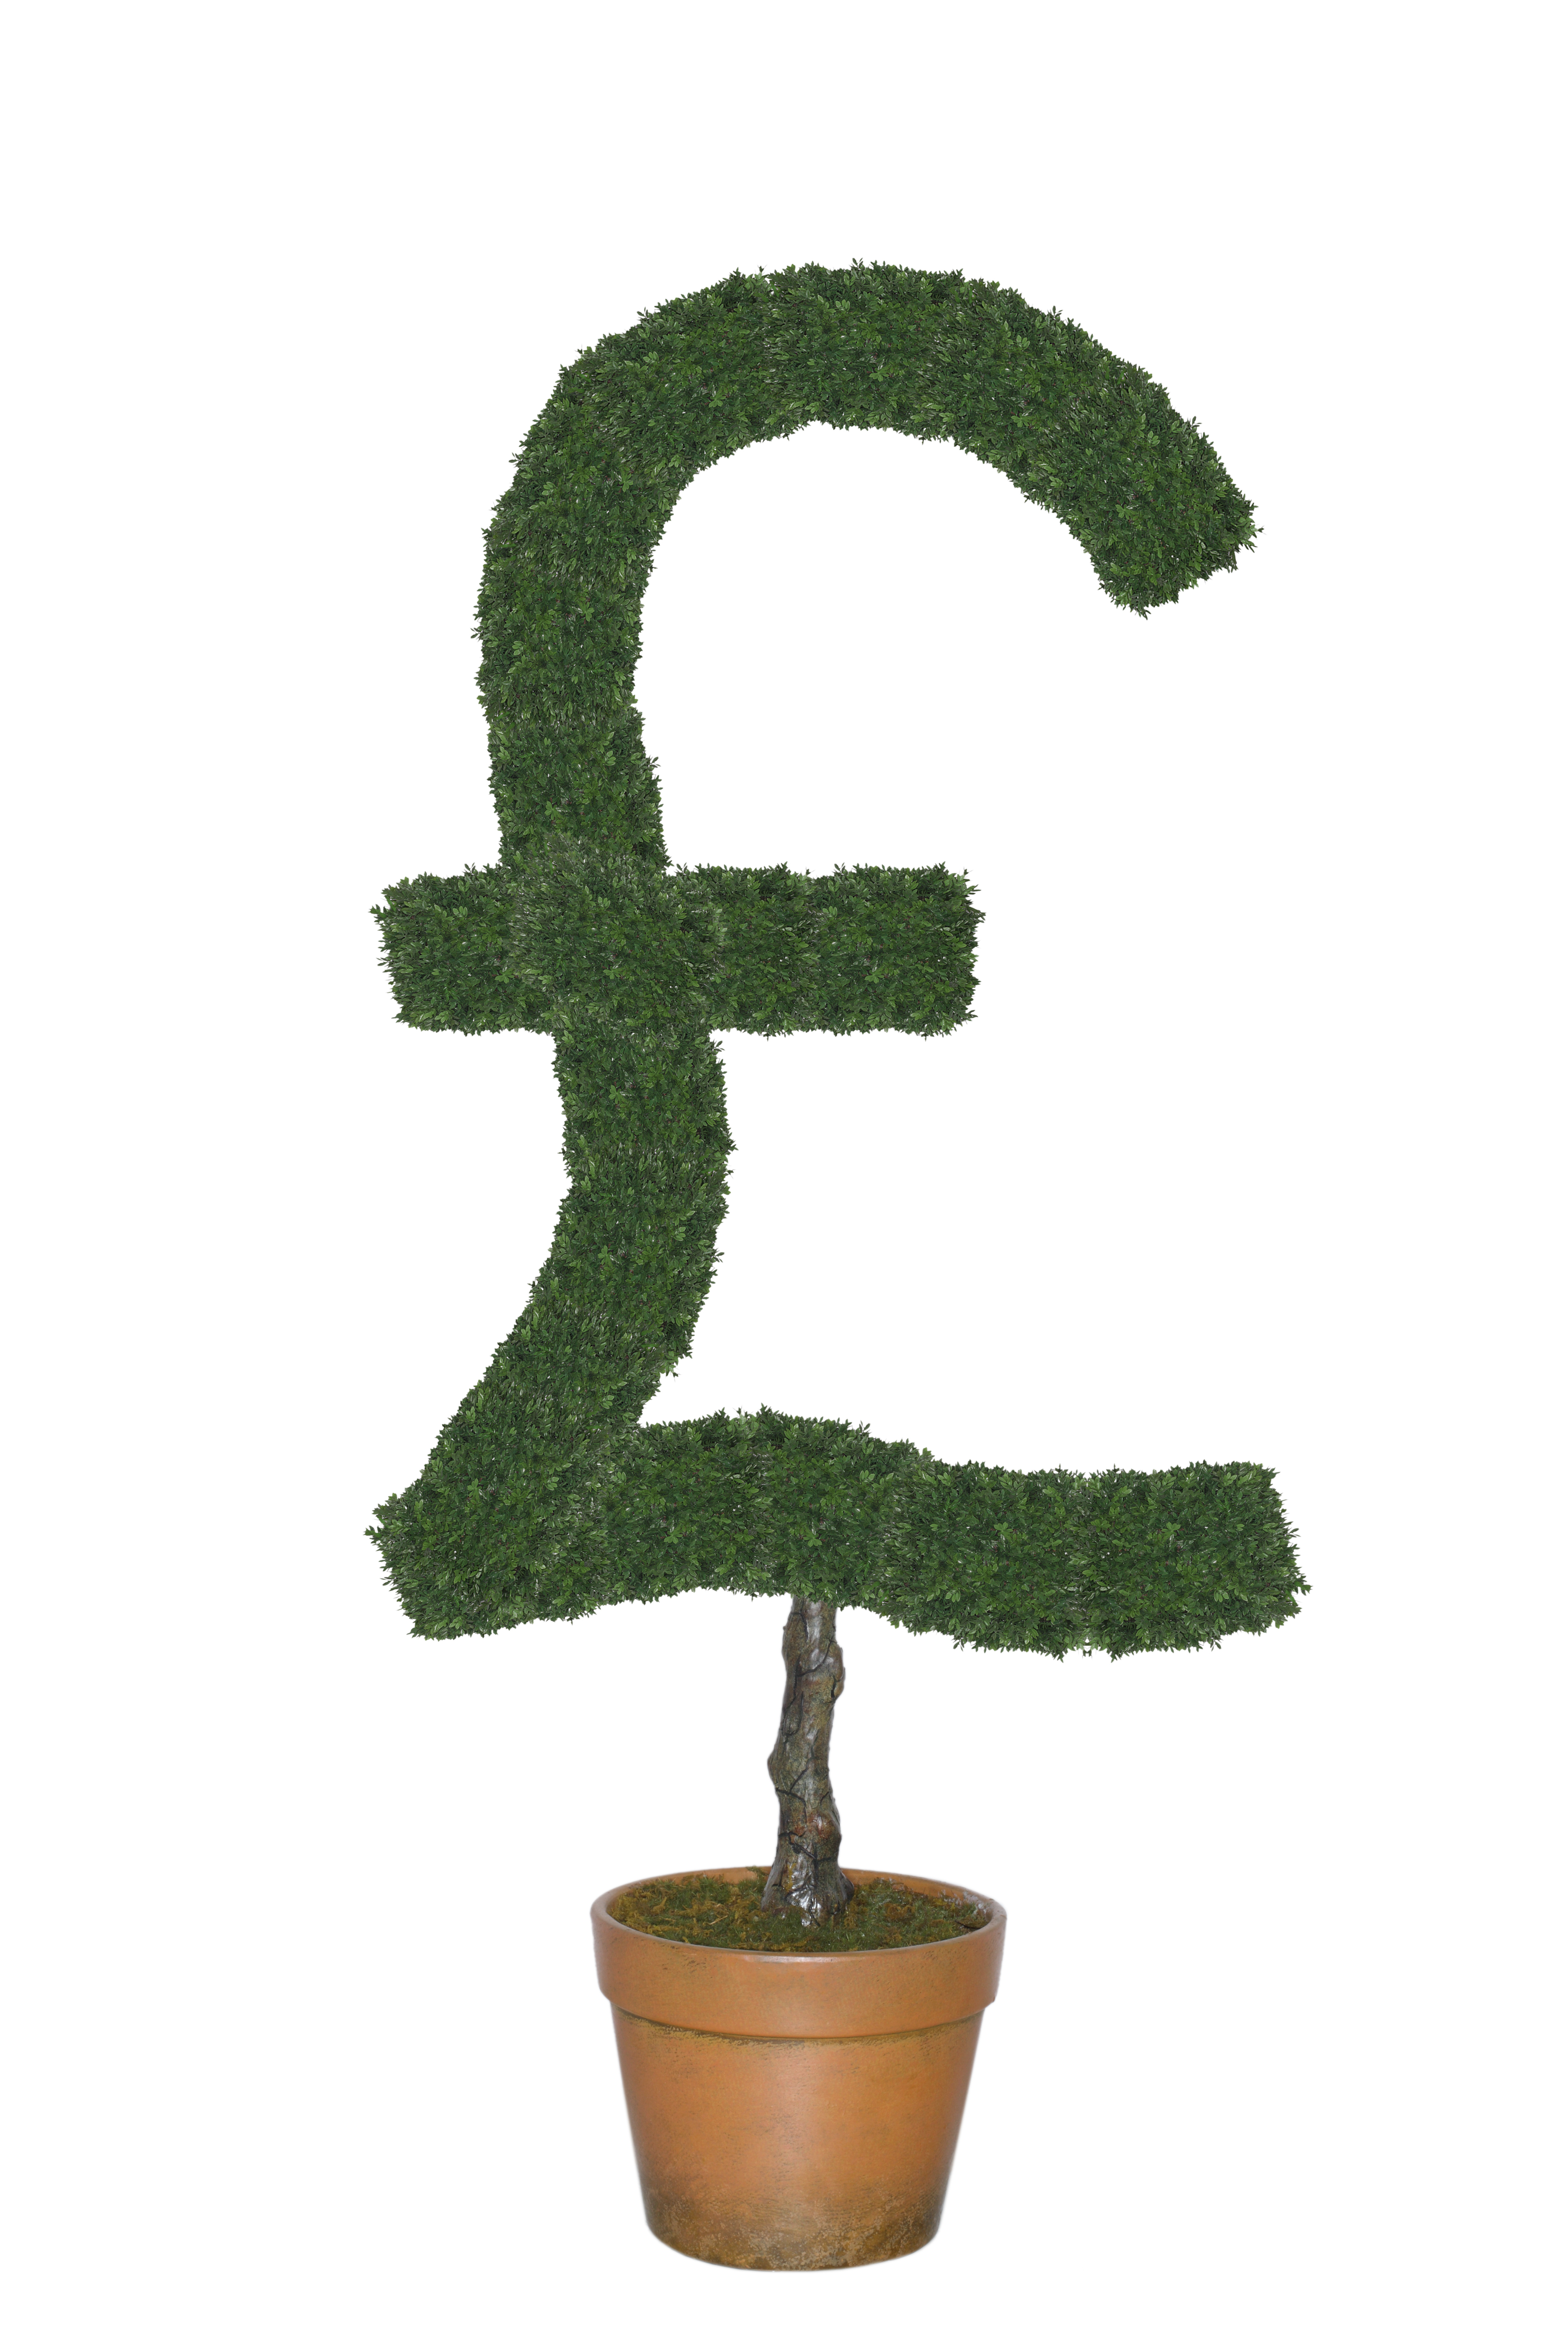 A £ sign growing from a plant pot.